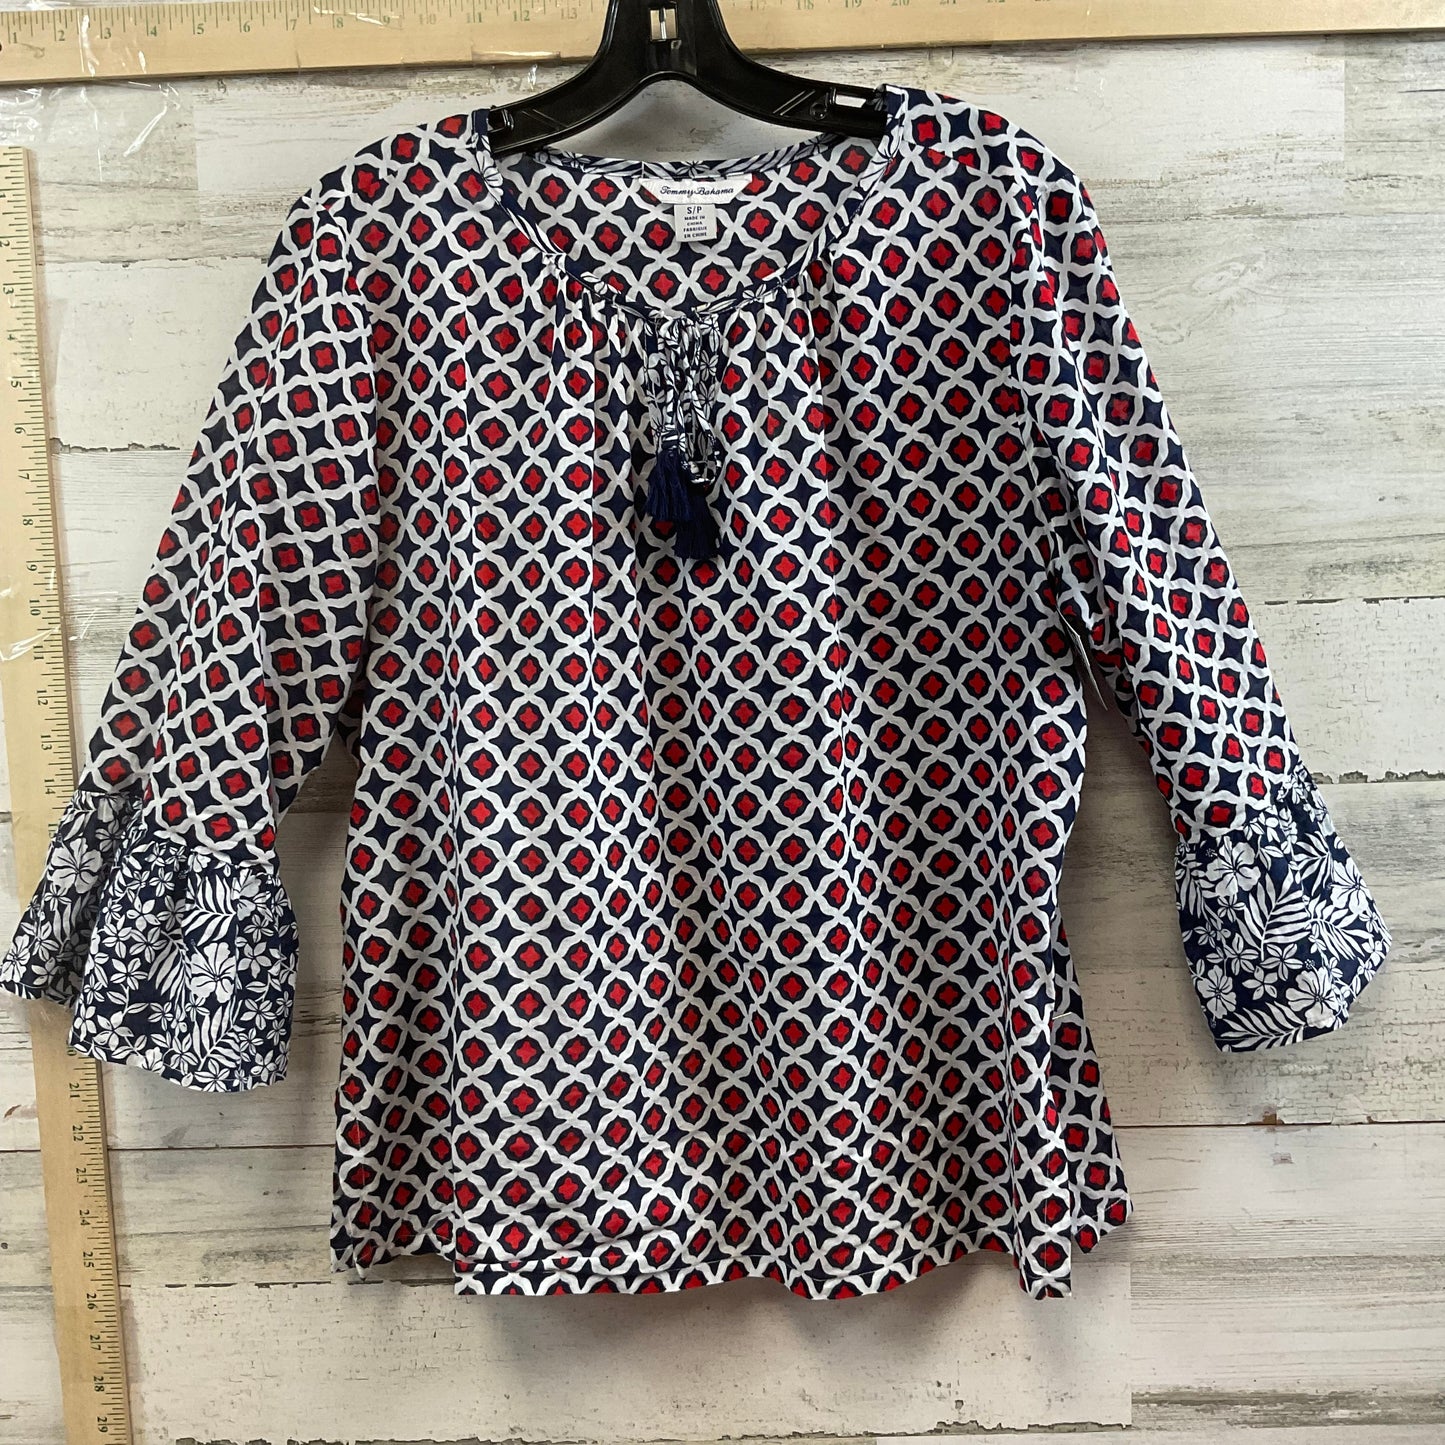 Blue & Red Top 3/4 Sleeve Tommy Bahama, Size S